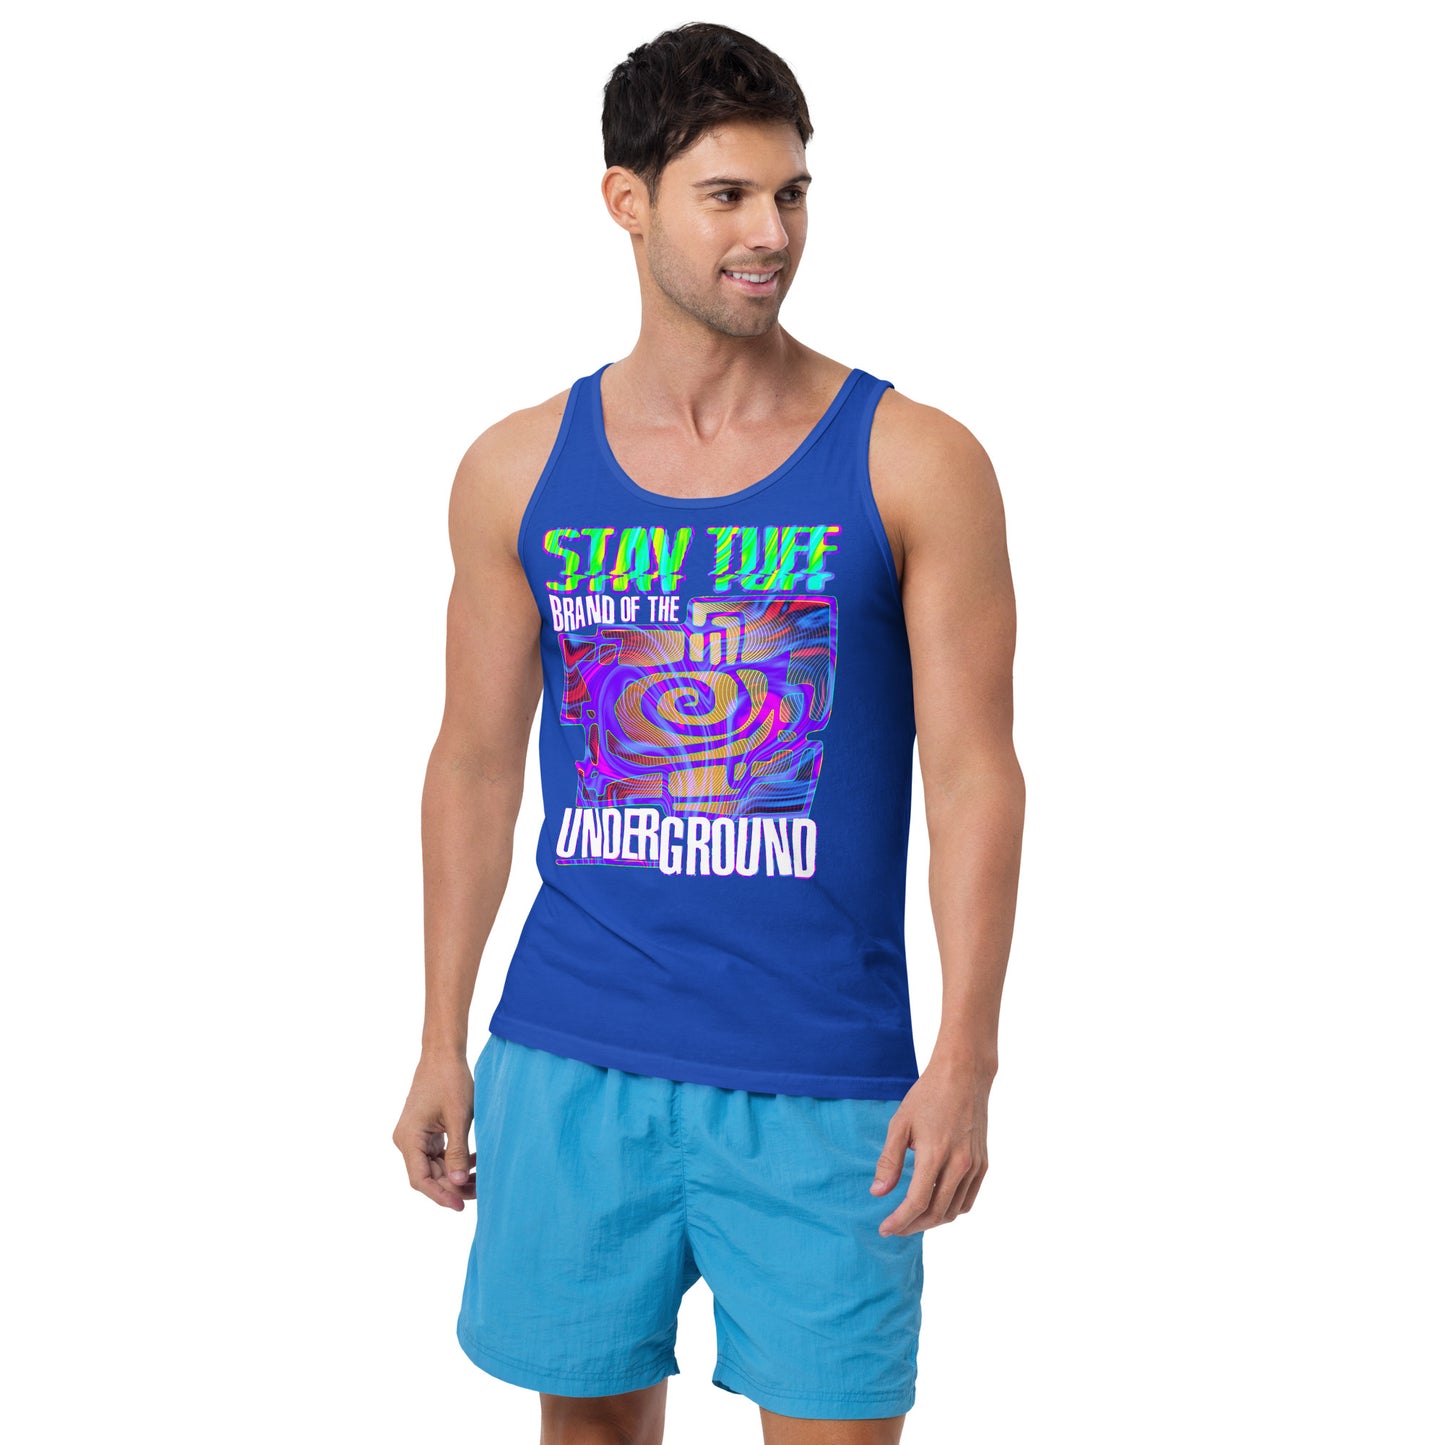 OUT OF SIGHT (Tank Top)